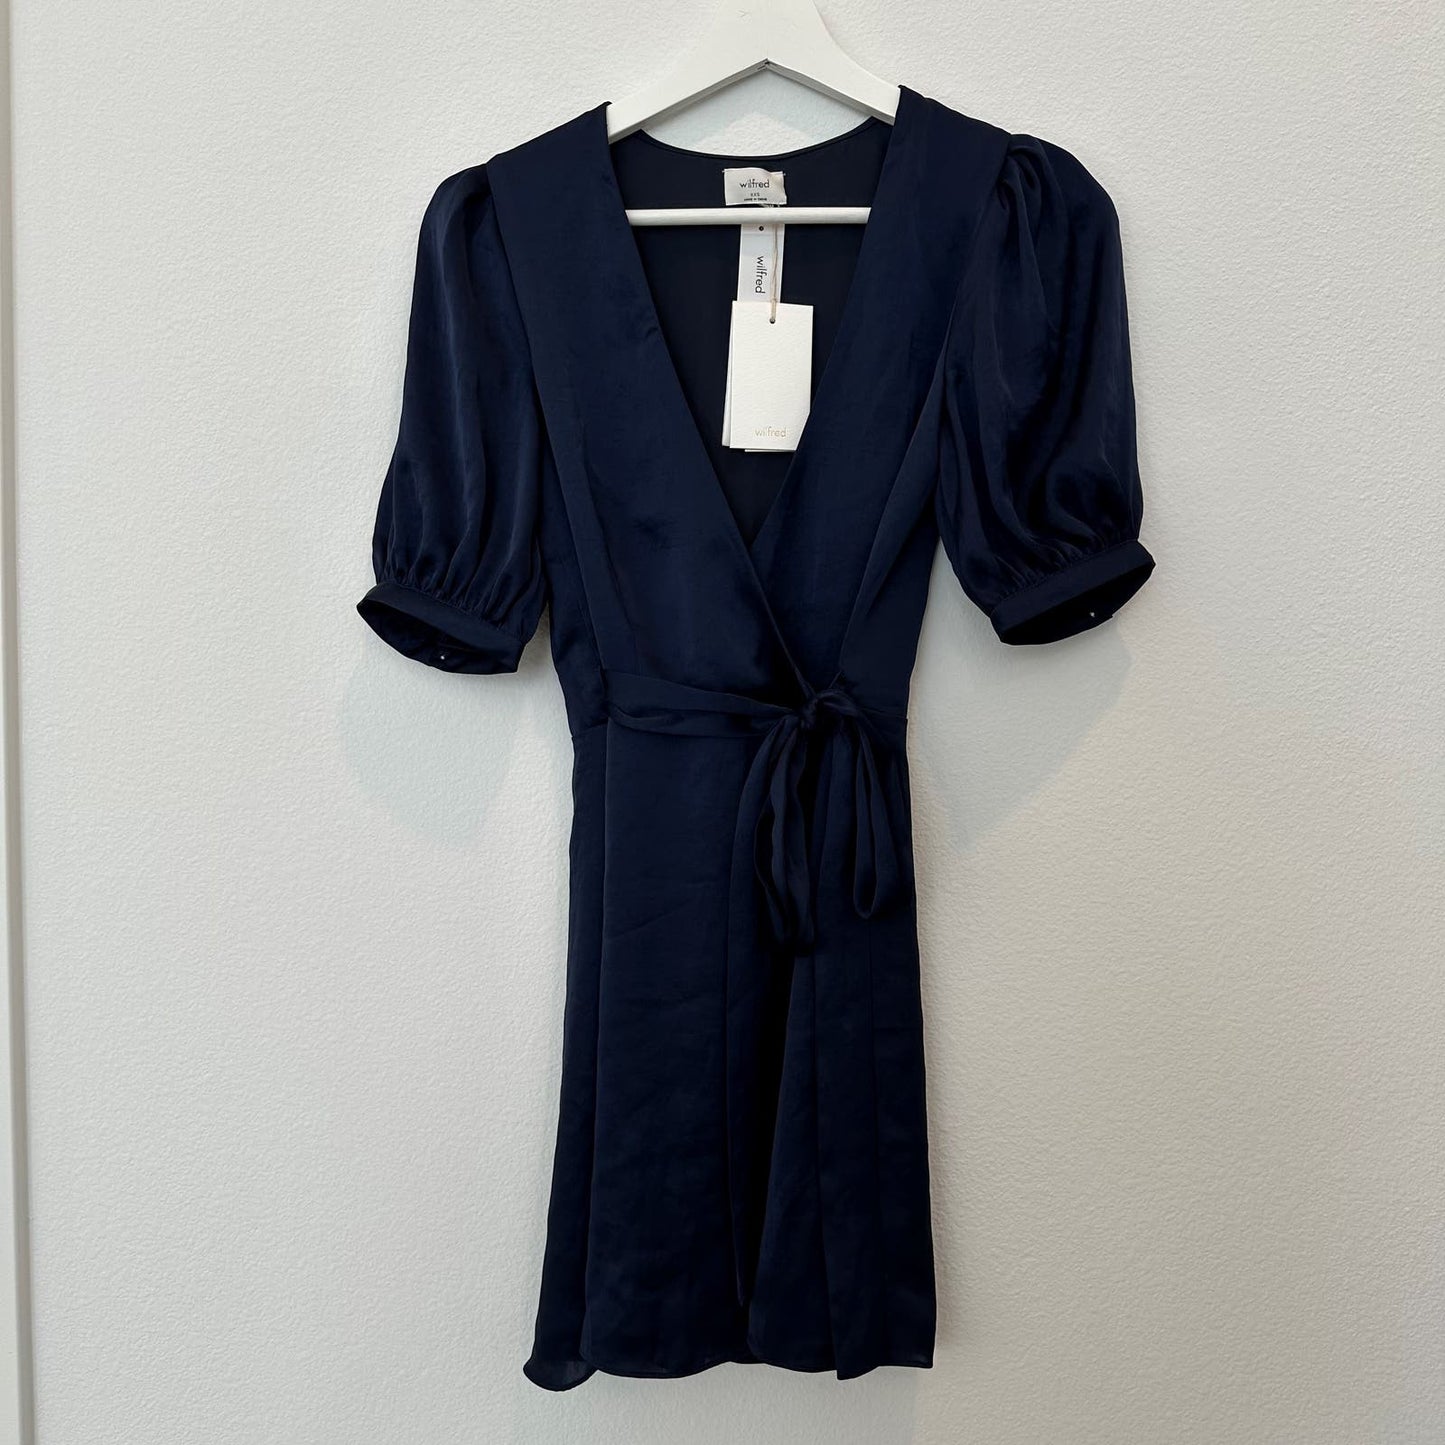 Wilfred Free Lune classy navy blue satin puff sleeve wrap dress